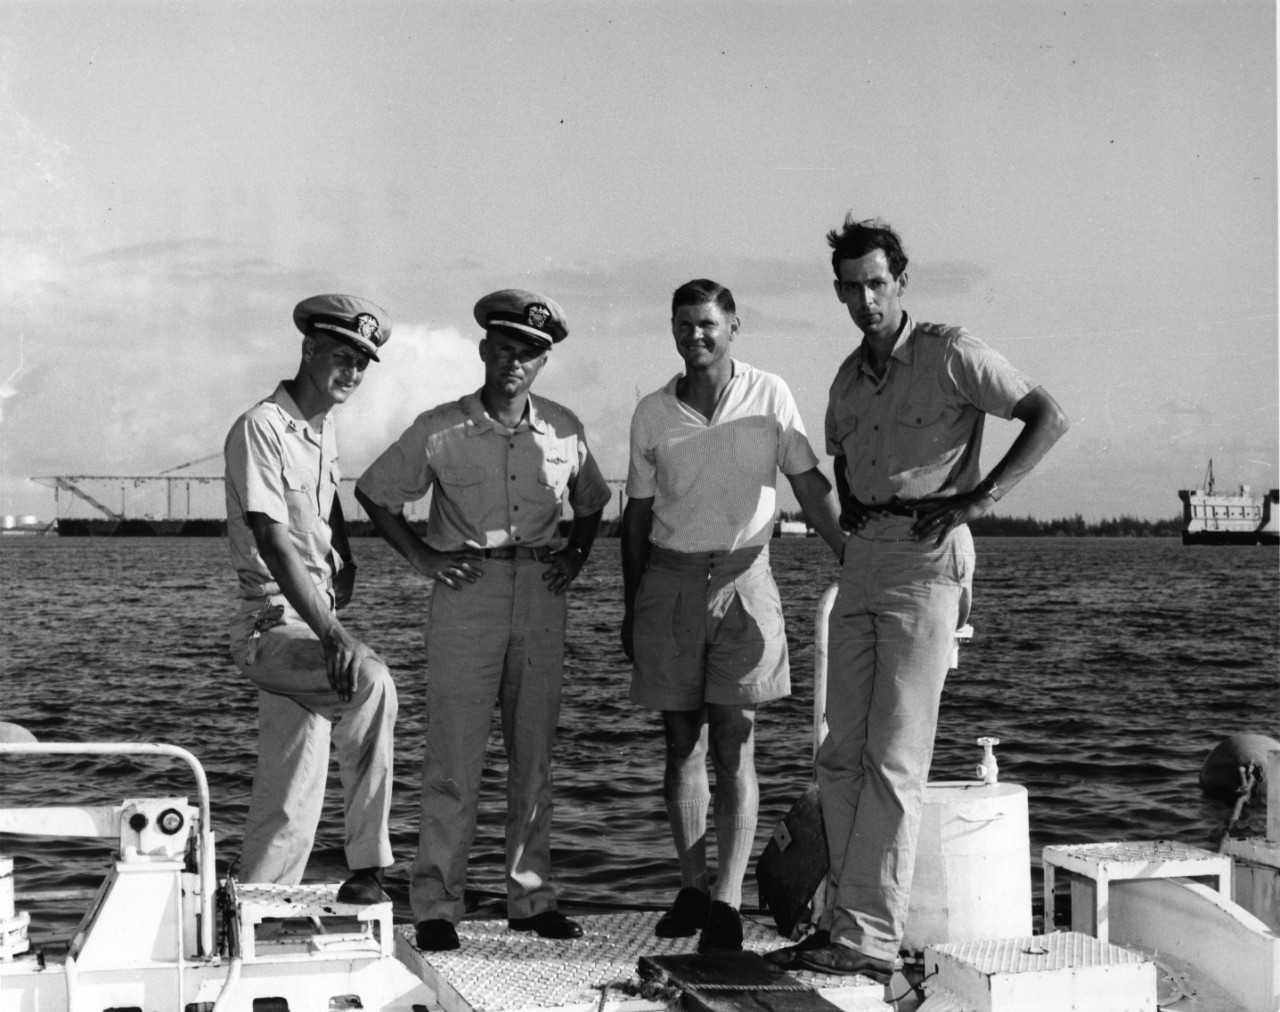 Left to Right: Lieutenant Larry Shumaker, Assistant Officer in Charge; Lieutenant Donald Walsh, Officer in Charge; Dr. Andreas B. Rechnitzer, Scientist in Charge; Jacques Piccard, Co-Designer and Technical Advisor of Bathyscaphe Trieste.